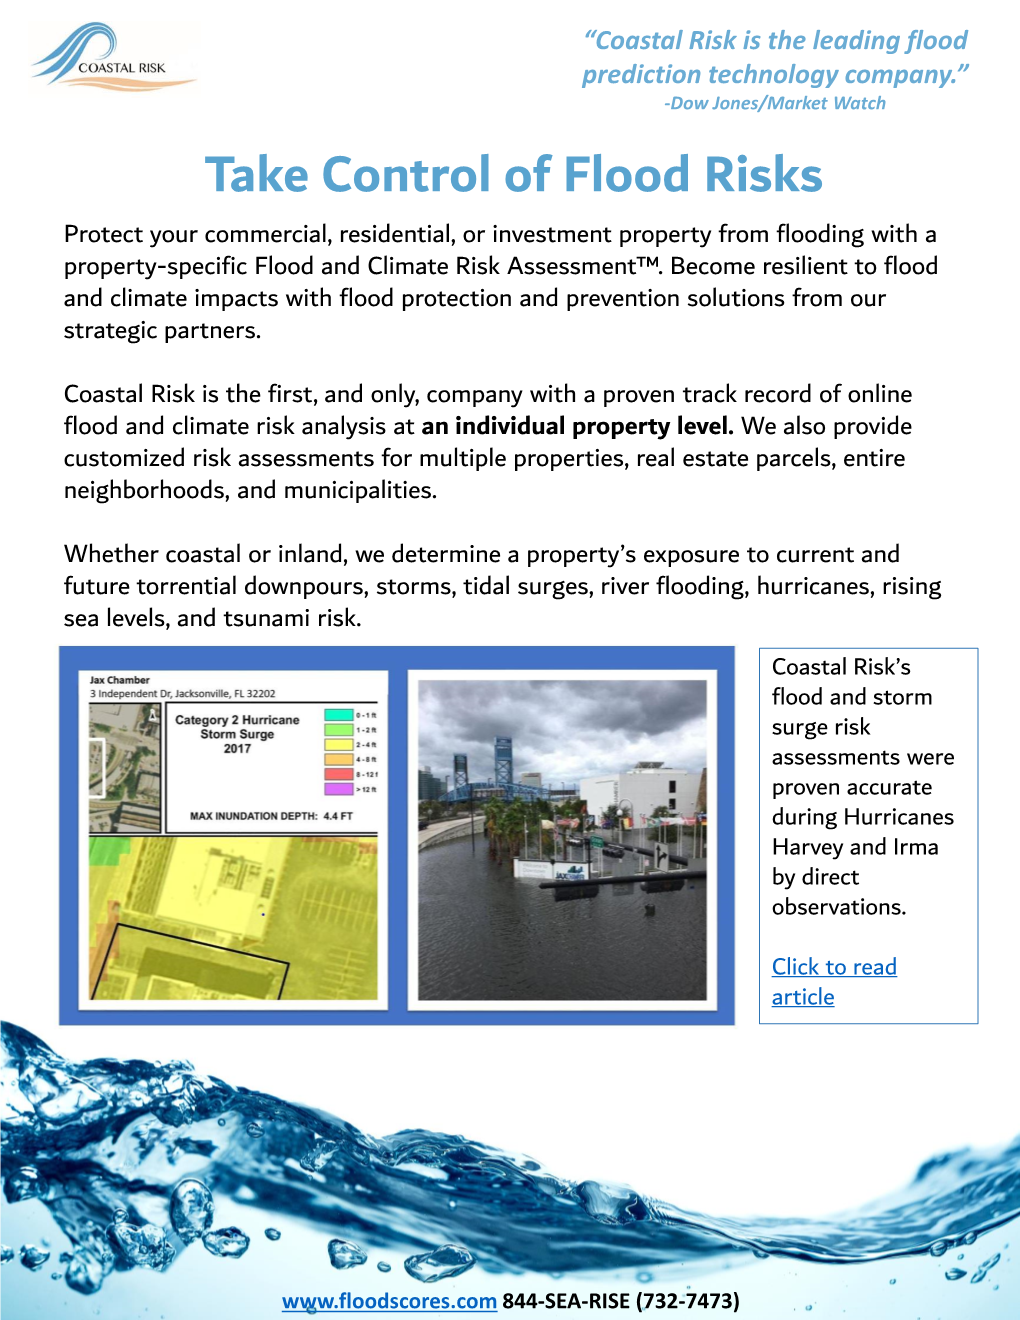 Take Control of Flood Risks Protect Your Commercial, Residential, Or Investment Property from Flooding with a Property-Specific Flood and Climate Risk Assessment™